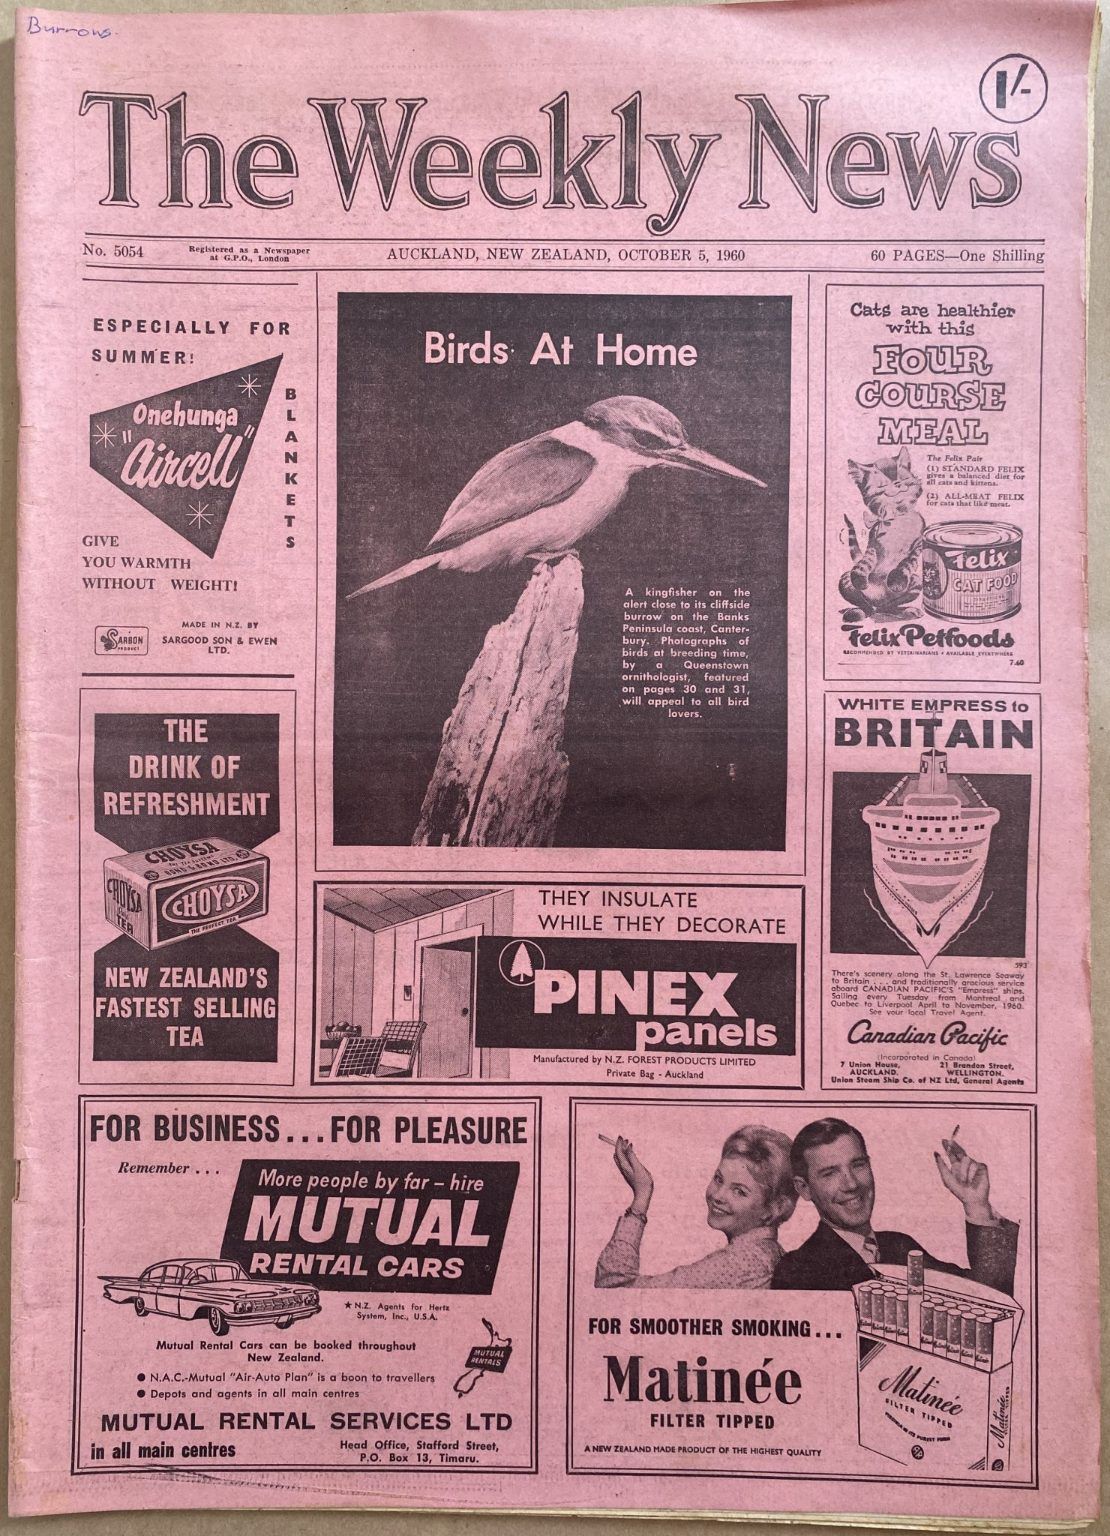 OLD NEWSPAPER: The Weekly News, No. 5054, 5 October 1960